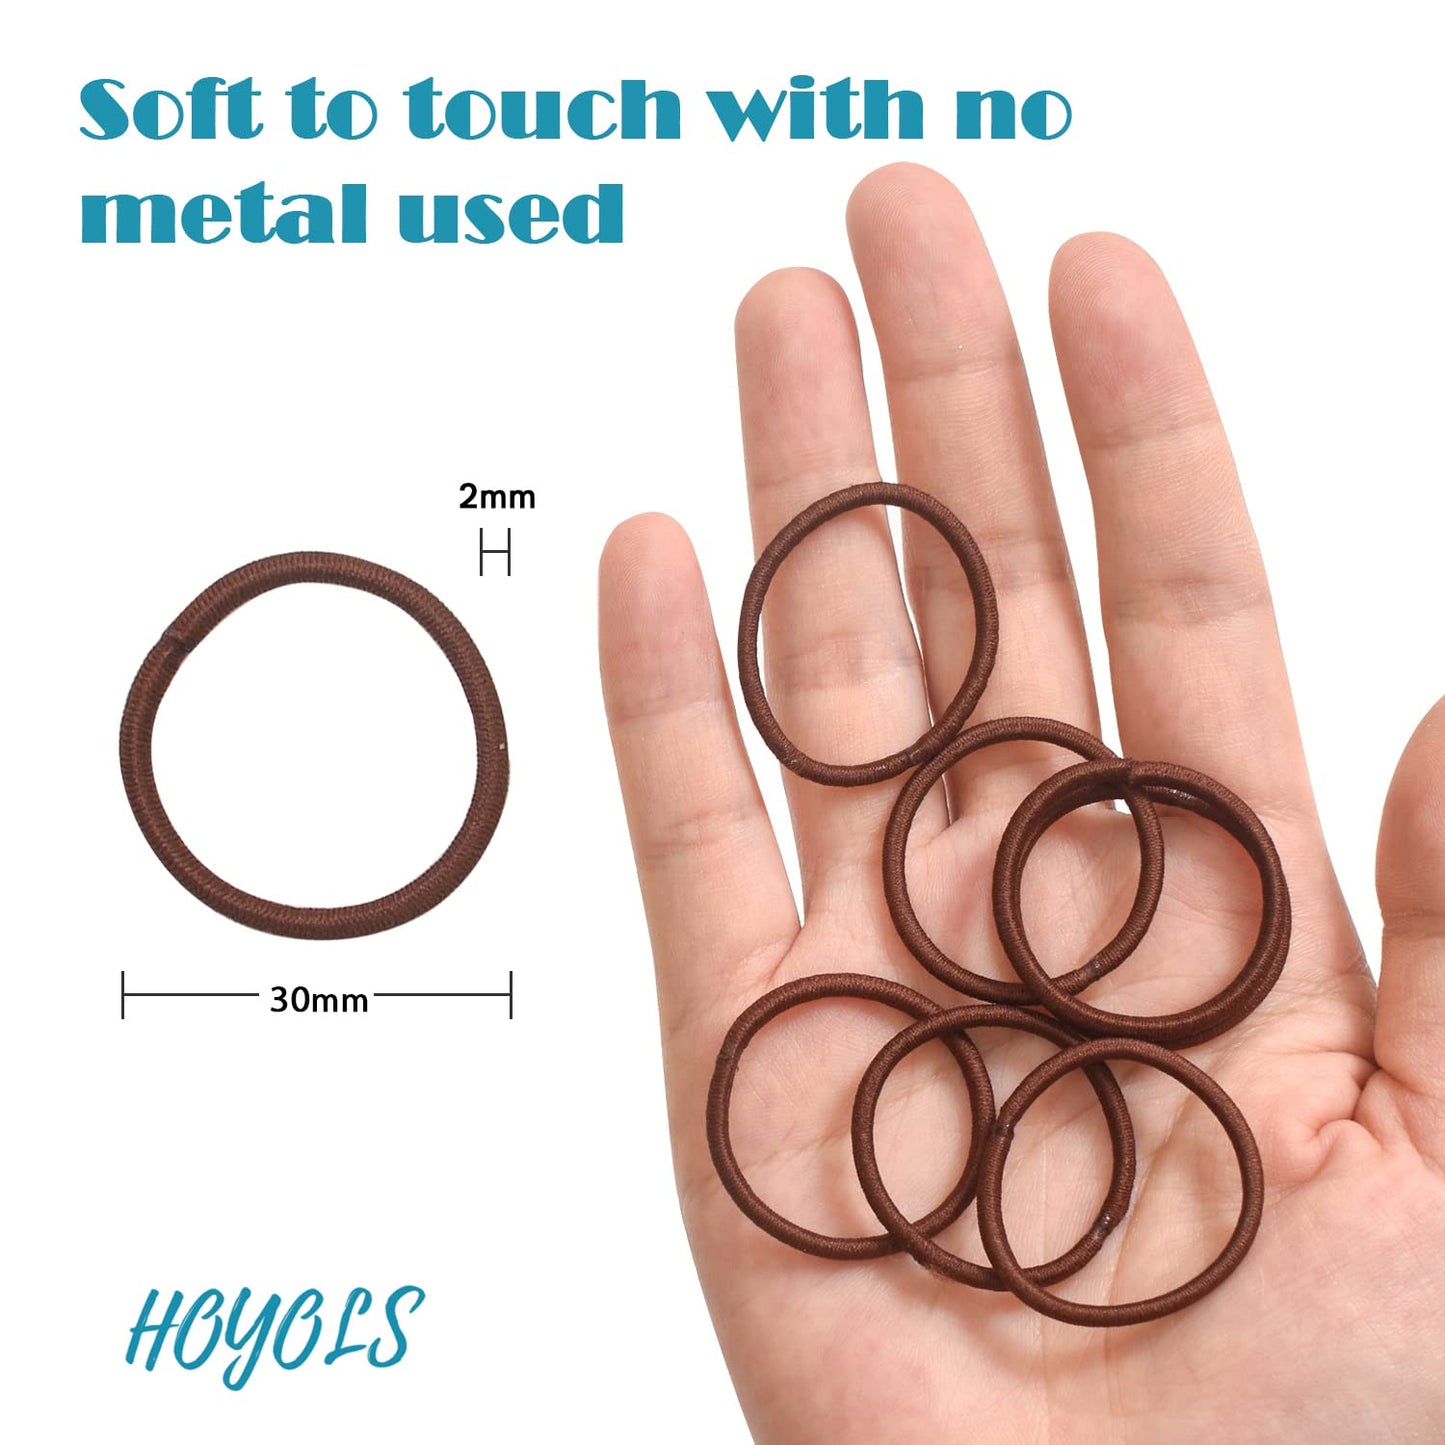 Hoyols 1” Thin Hair Ties Elastic for Fine Hair, Hair Bands for Baby Girls Kids Hair Ponytail Holders Hair Ties Polybands Brown 100 Count 2mm (Auburn)